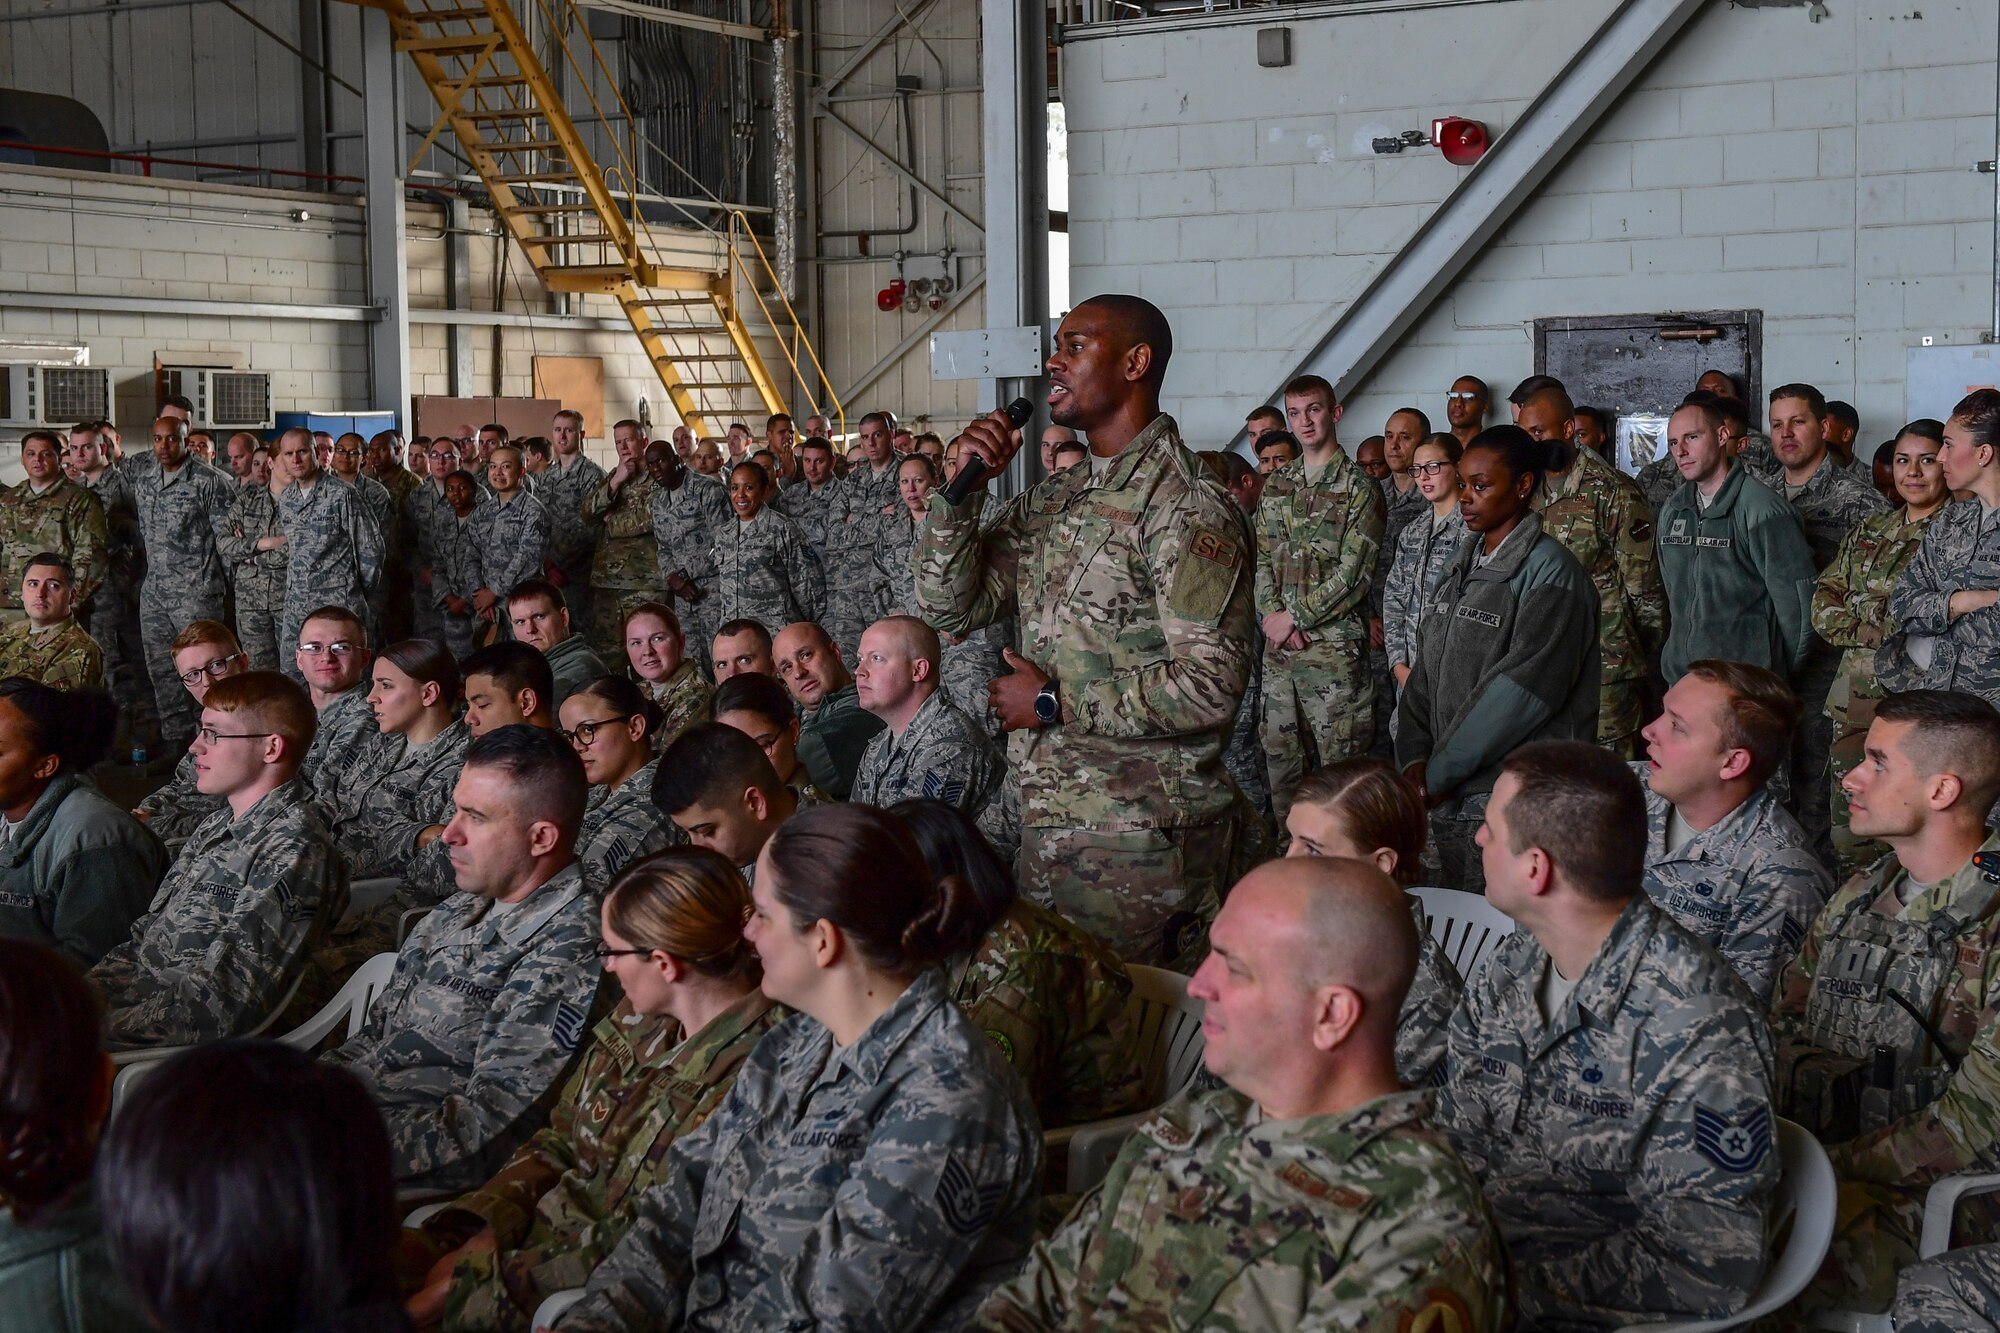 An airman asks Air Force Chief of Staff and Chief Master Sgt. of the Air Force a question.